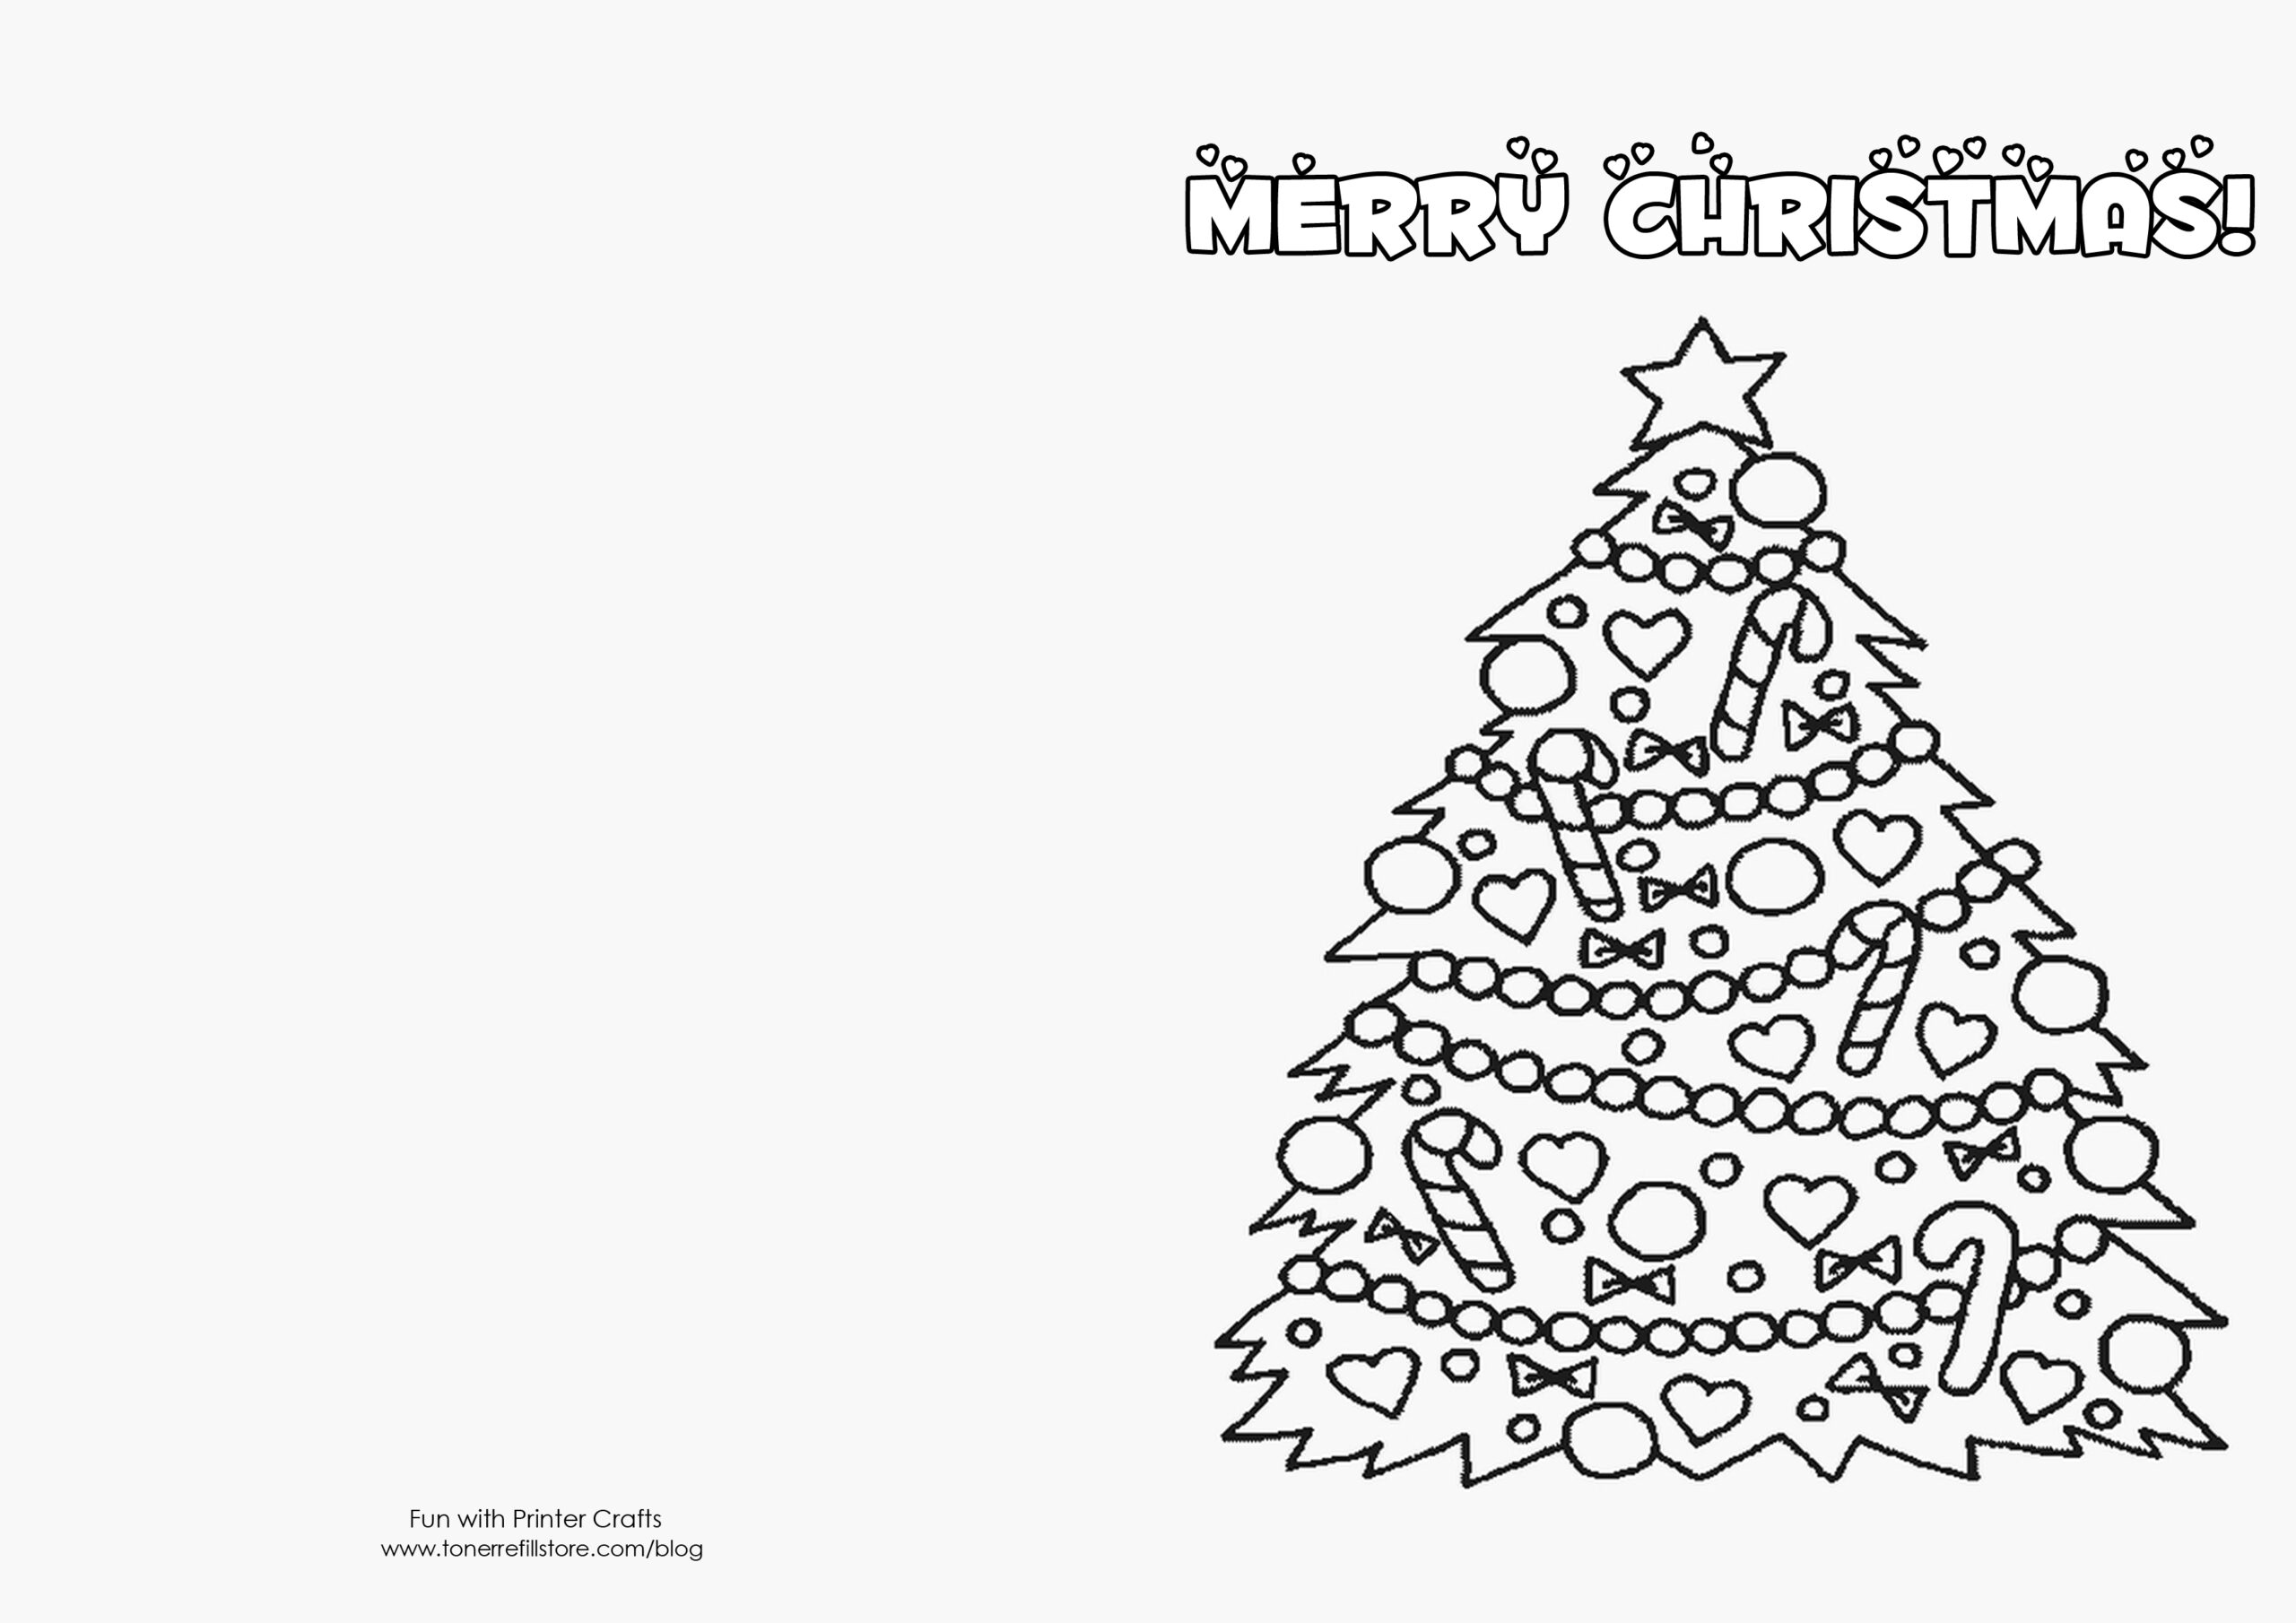 Free Printable Christmas Cards Templates - Zimer.bwong.co With Regard To Print Your Own Christmas Cards Templates